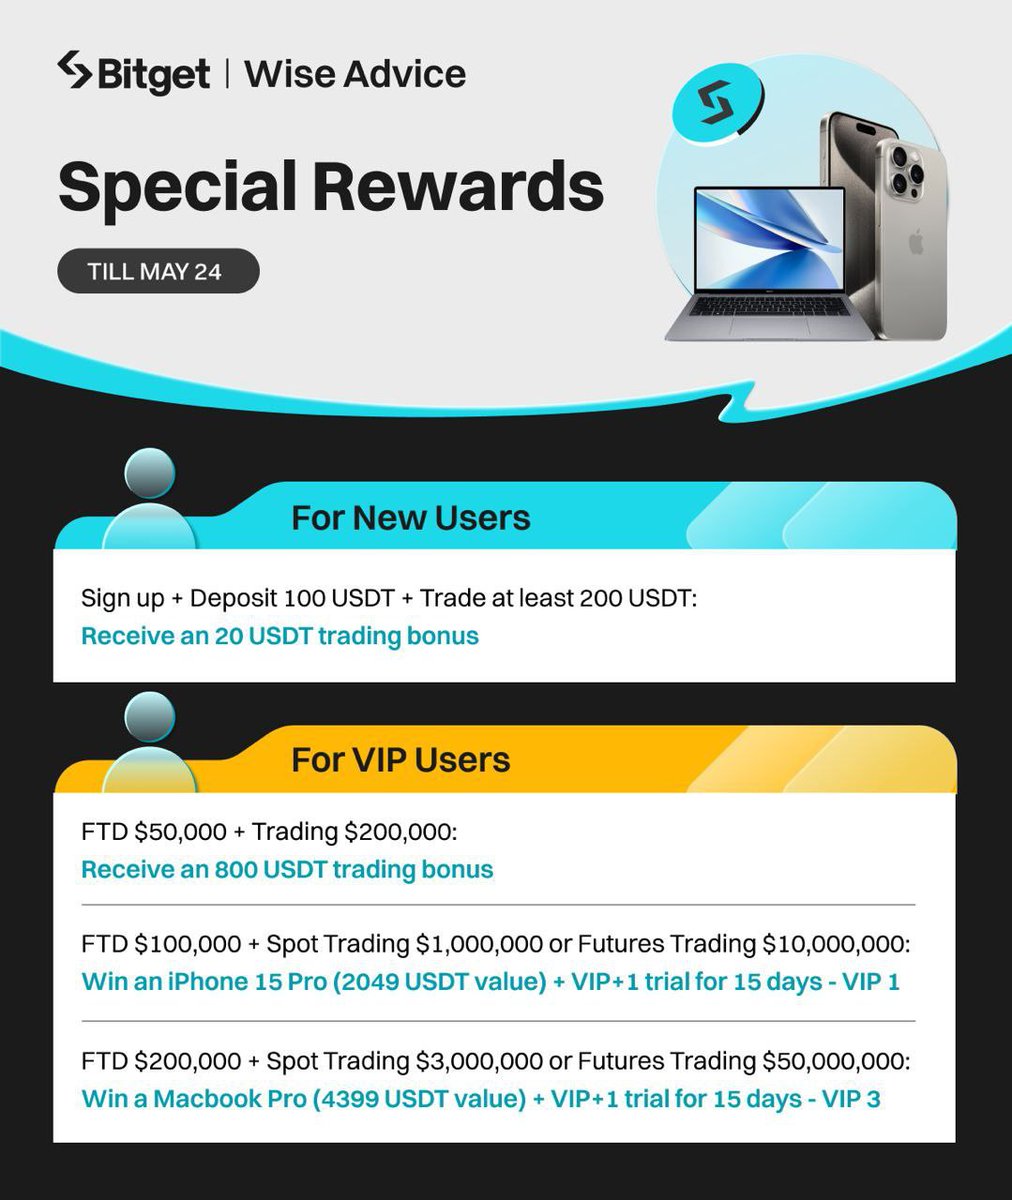 𝗪𝗶𝗻 𝗠𝗮𝗰𝗕𝗼𝗼𝗸 𝗣𝗿𝗼 𝗮𝗻𝗱 𝗶𝗣𝗵𝗼𝗻𝗲 𝟭𝟱 𝗣𝗿𝗼 📱💻 🤩 Special reward is waiting for the Wise Advice community on Bitget To get this special offer, you have to use this link to create your Bitget account 👇 tinyurl.com/2w7sysxc 𝙀𝙫𝙚𝙣𝙩 𝙍𝙪𝙡𝙚𝙨 👇…